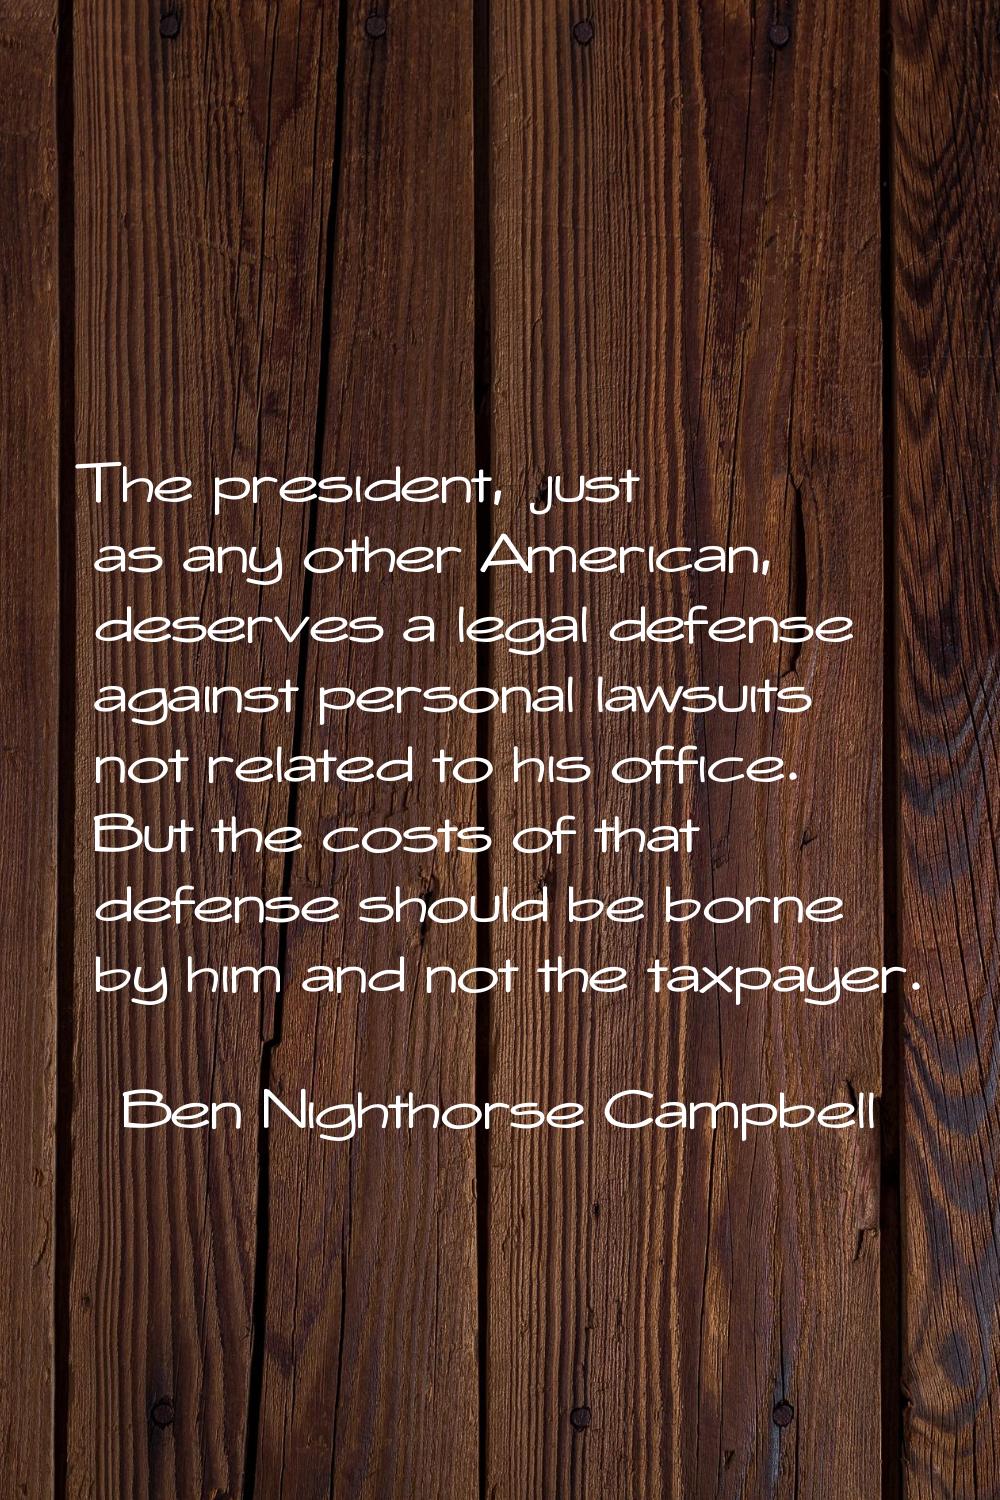 The president, just as any other American, deserves a legal defense against personal lawsuits not r